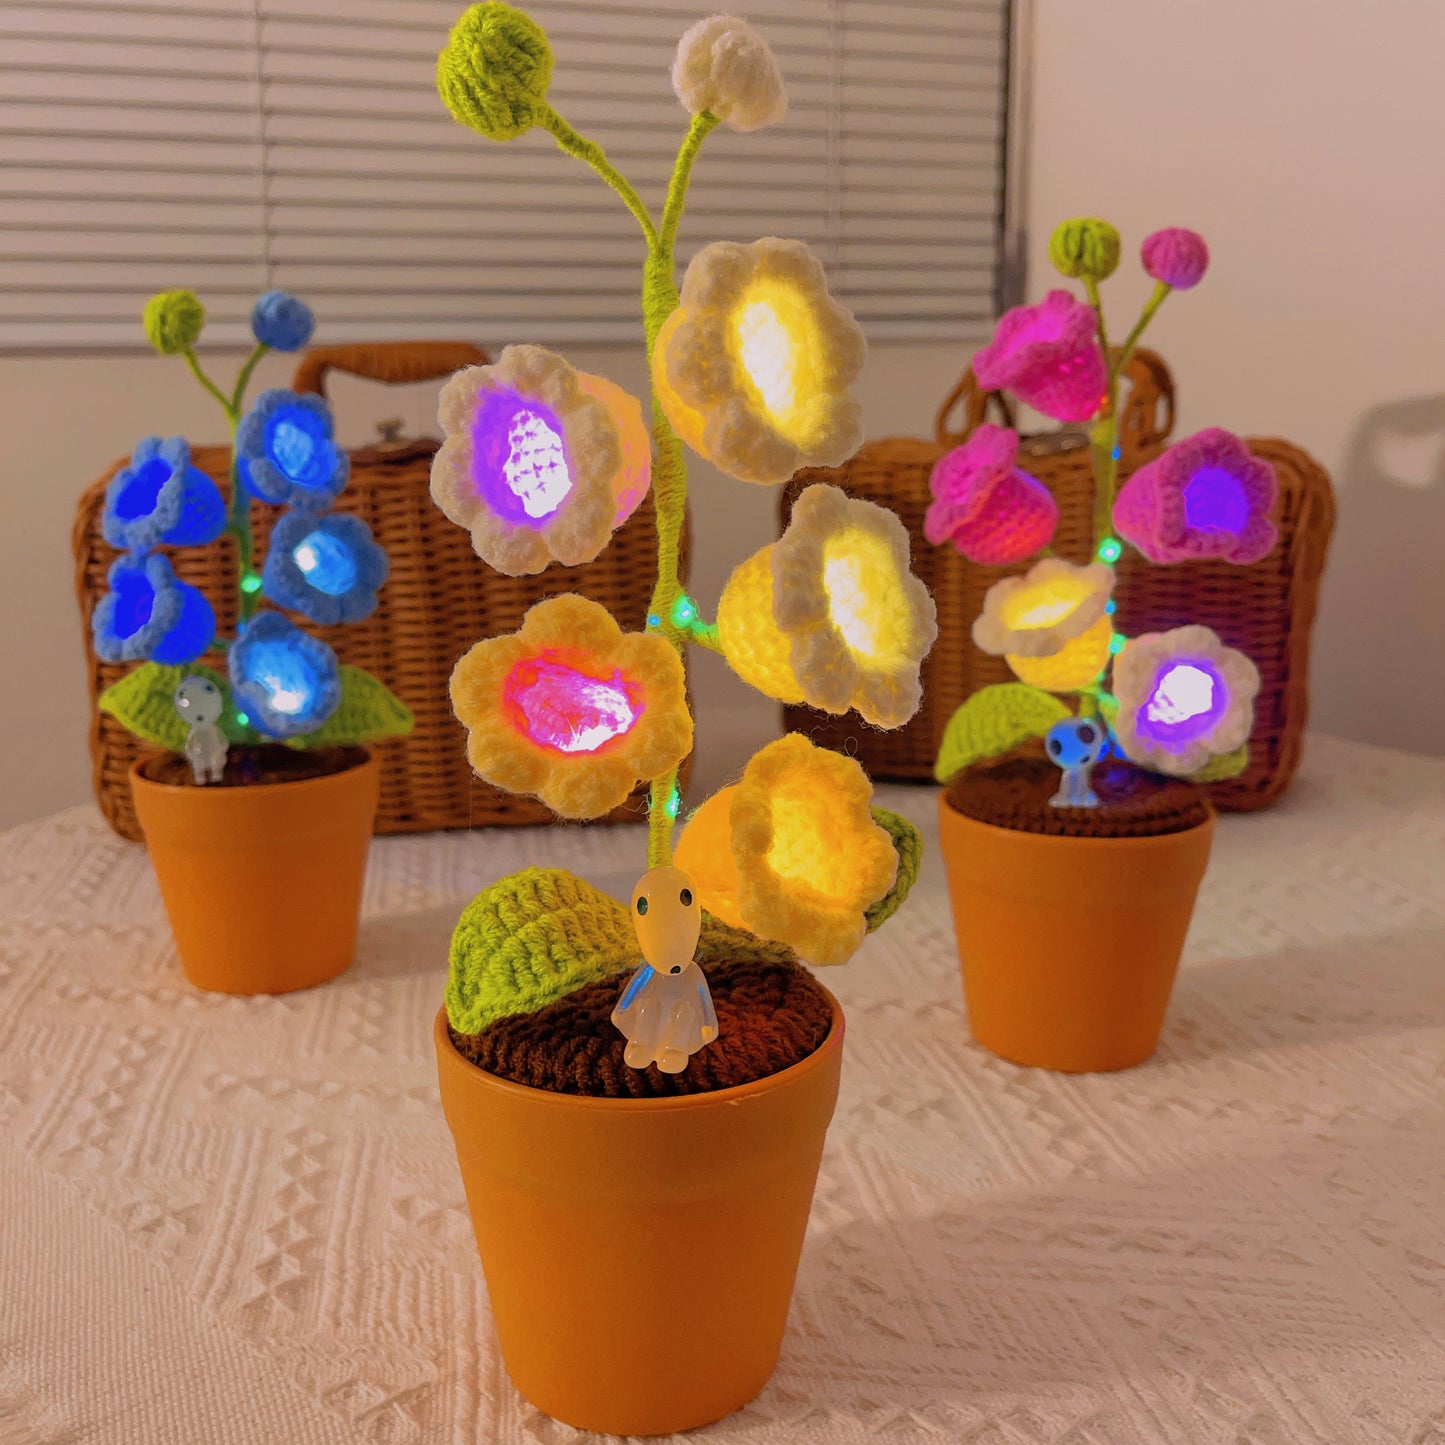 Handmade Crochet Lily of the Valley Plant - Glowing LED Flowers - Unique Home Decor - Perfect Gift for Plant Lovers - Yarn Handcrafted